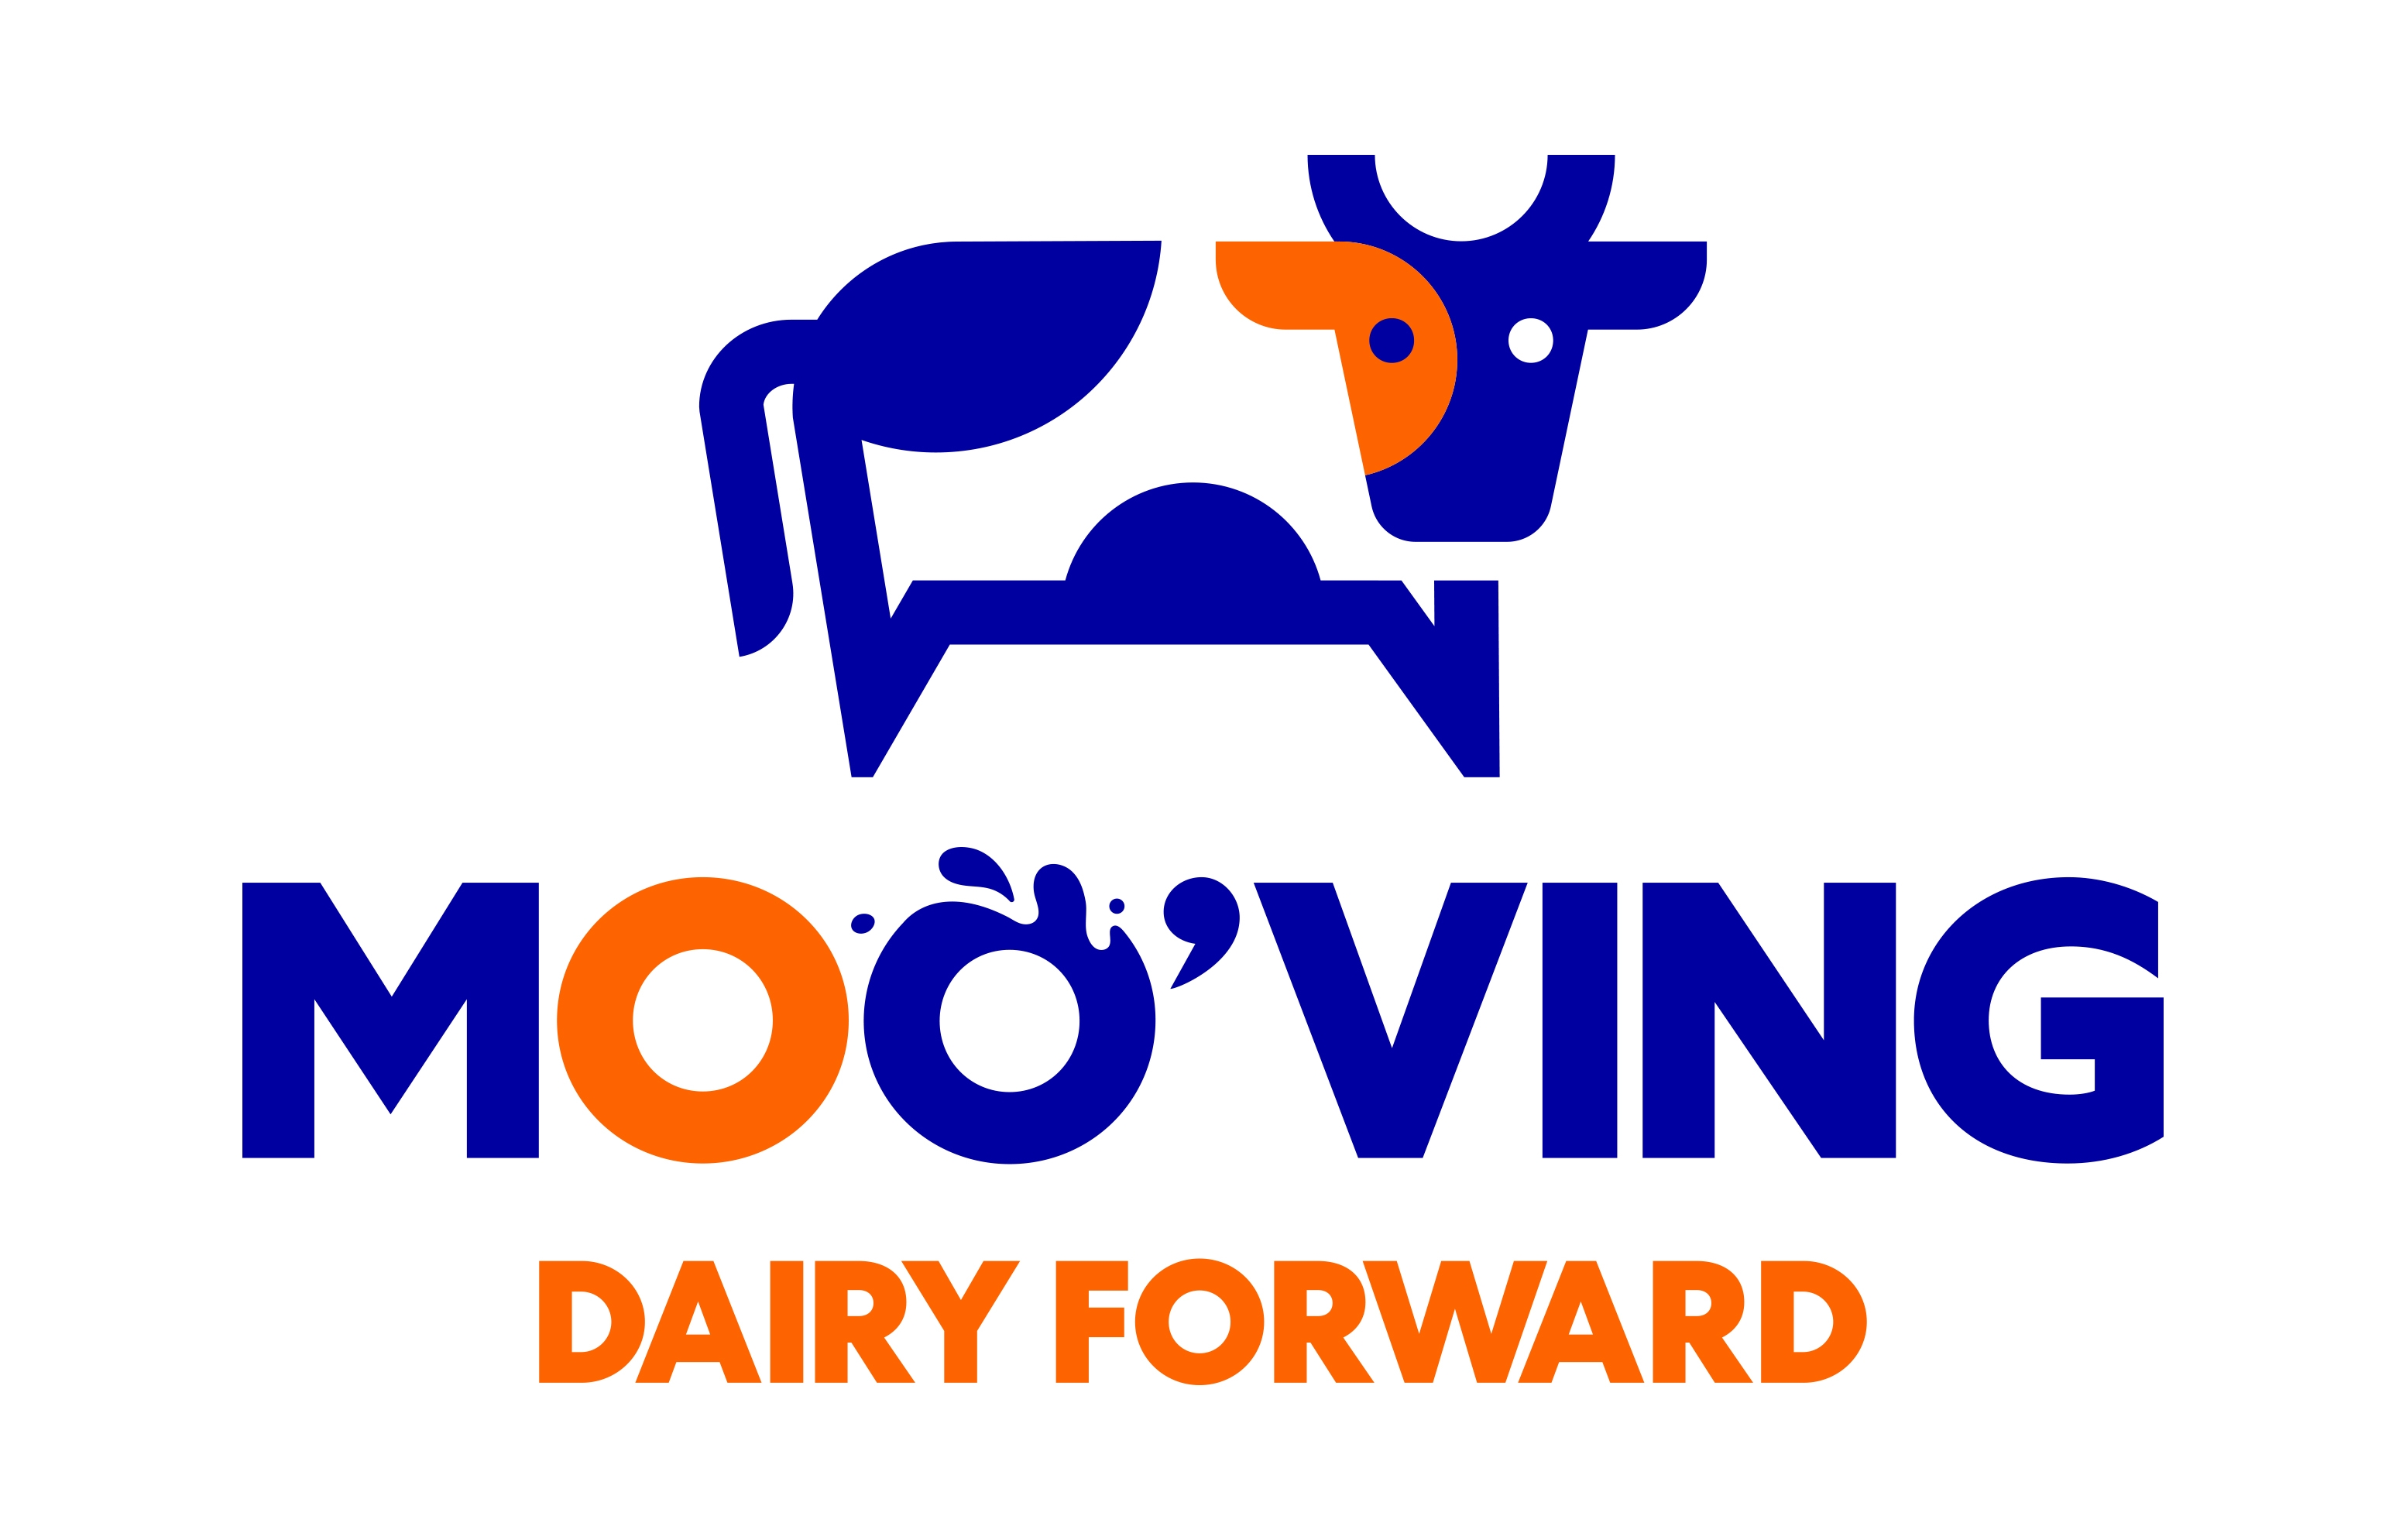 Moo'ving Dairy Forward logo with an illustration of a cow